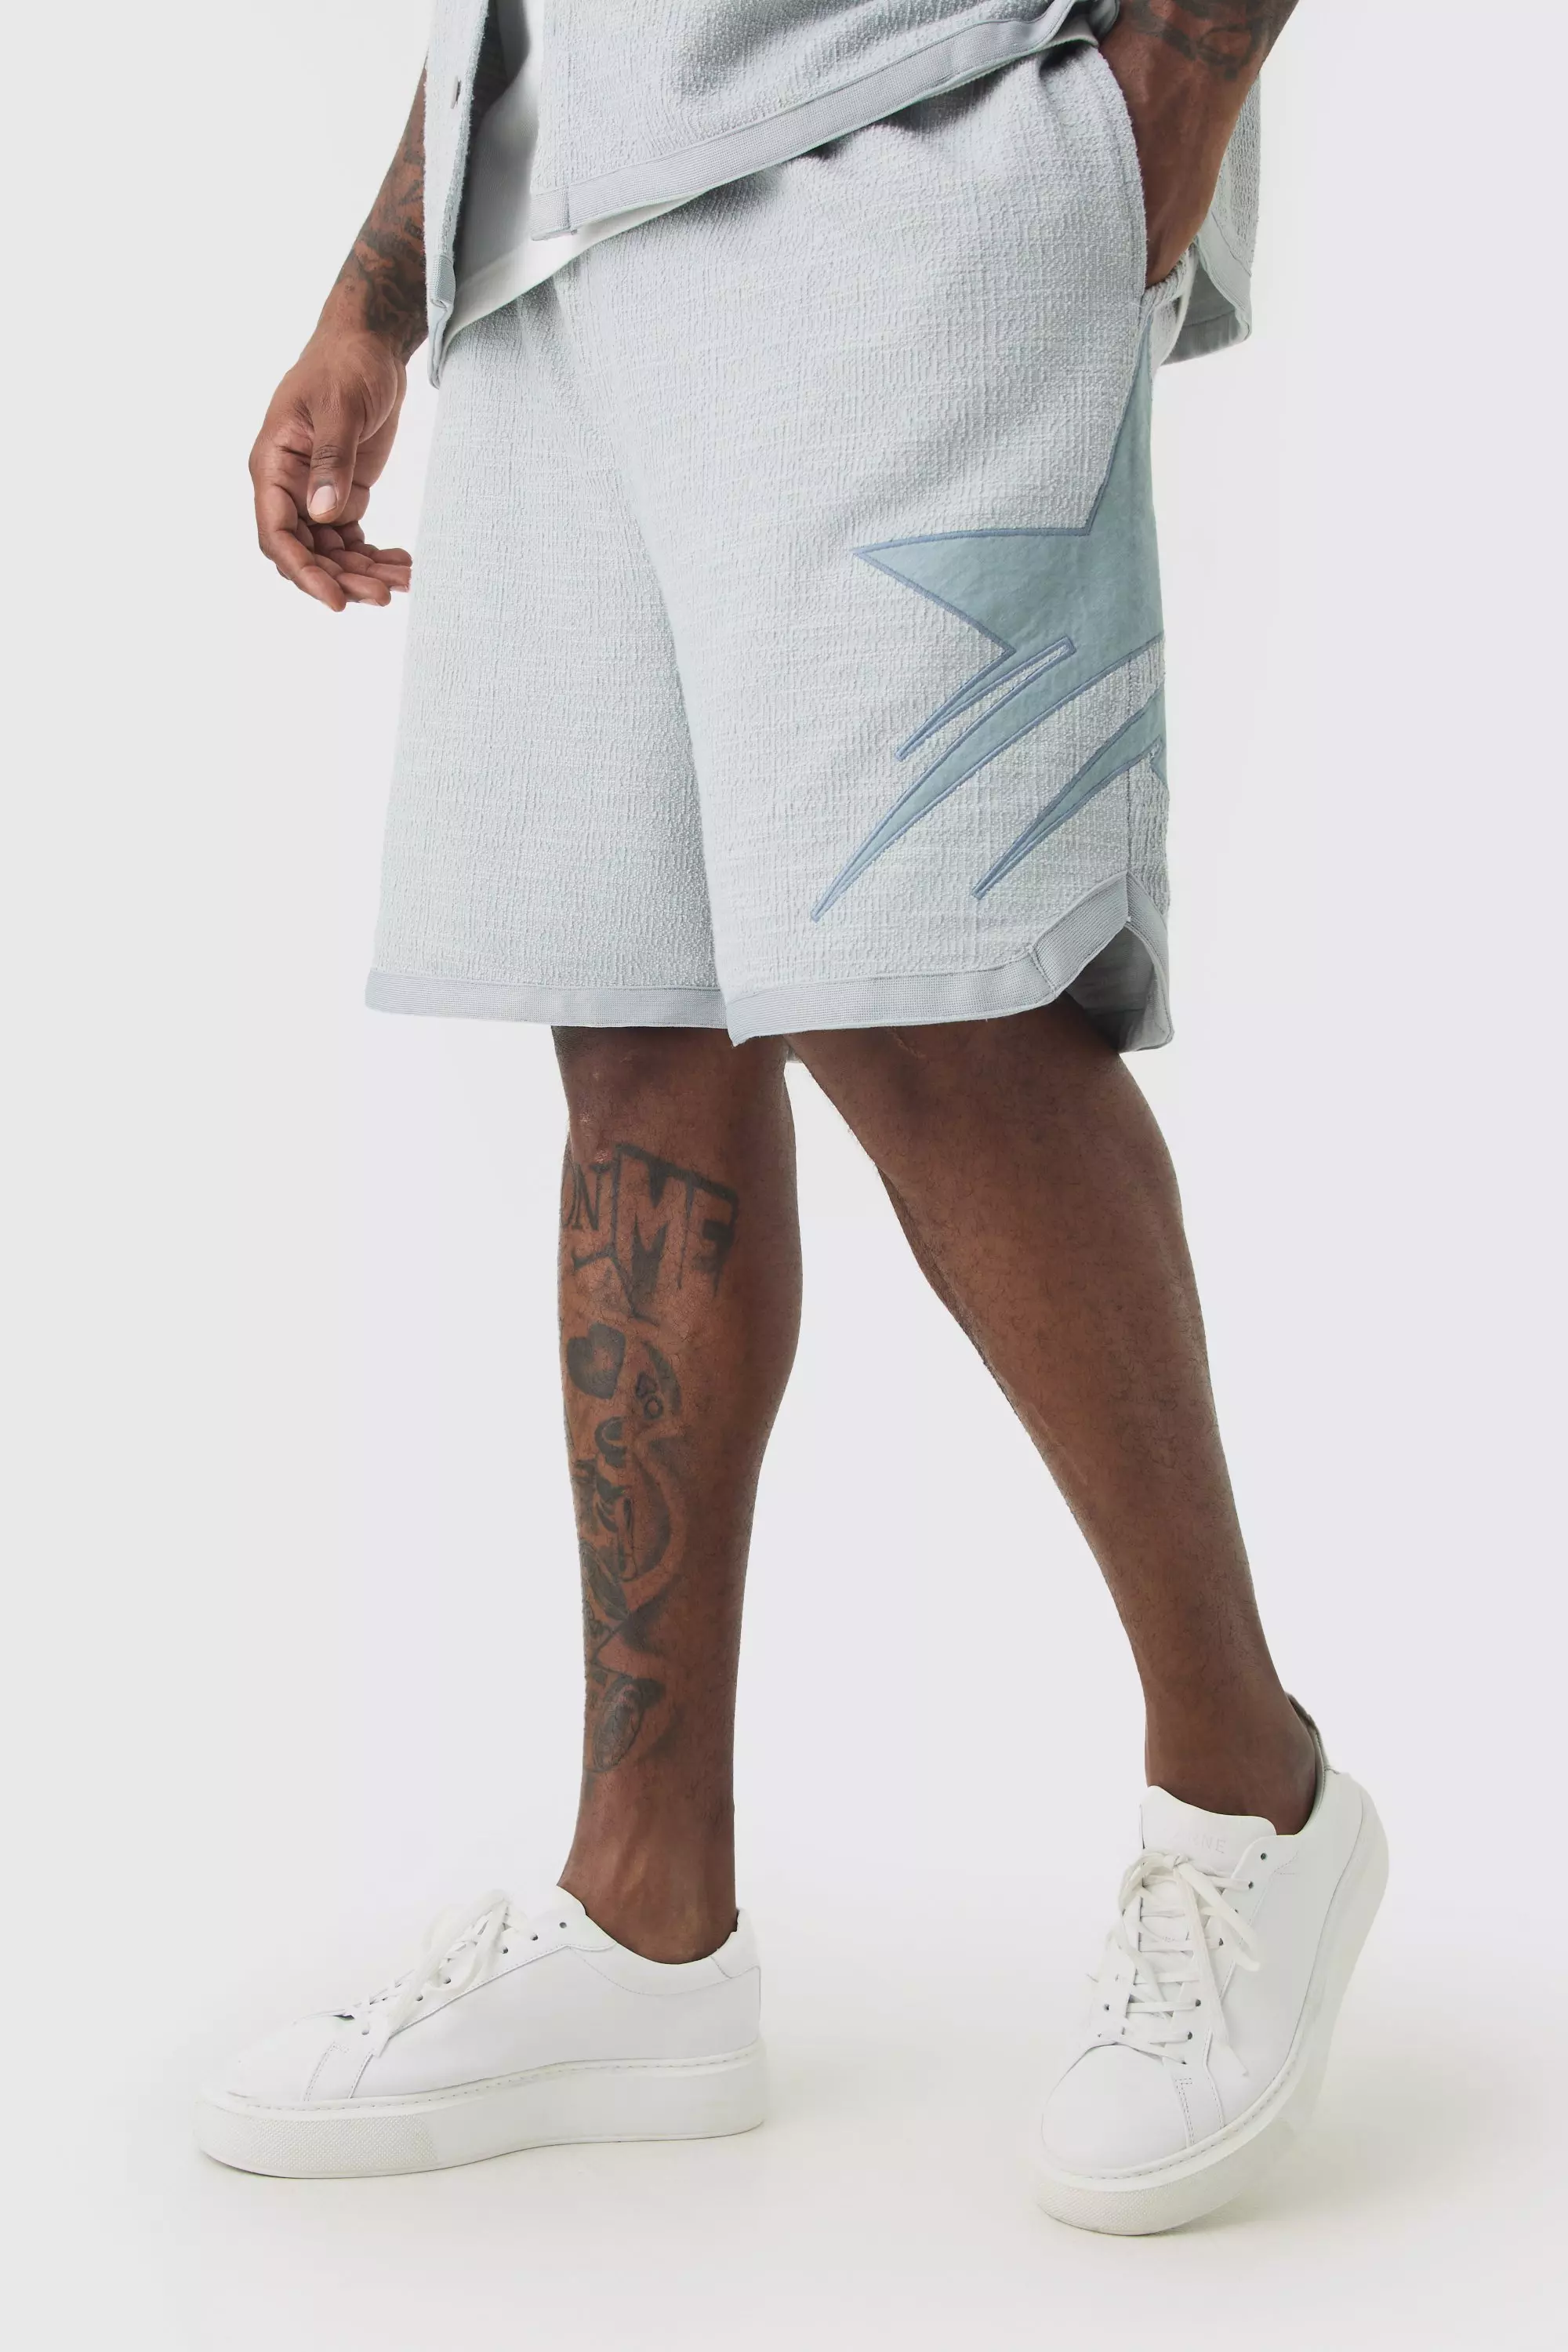 Plus Textured Star Embroidered Mid Length Basketball Short Grey